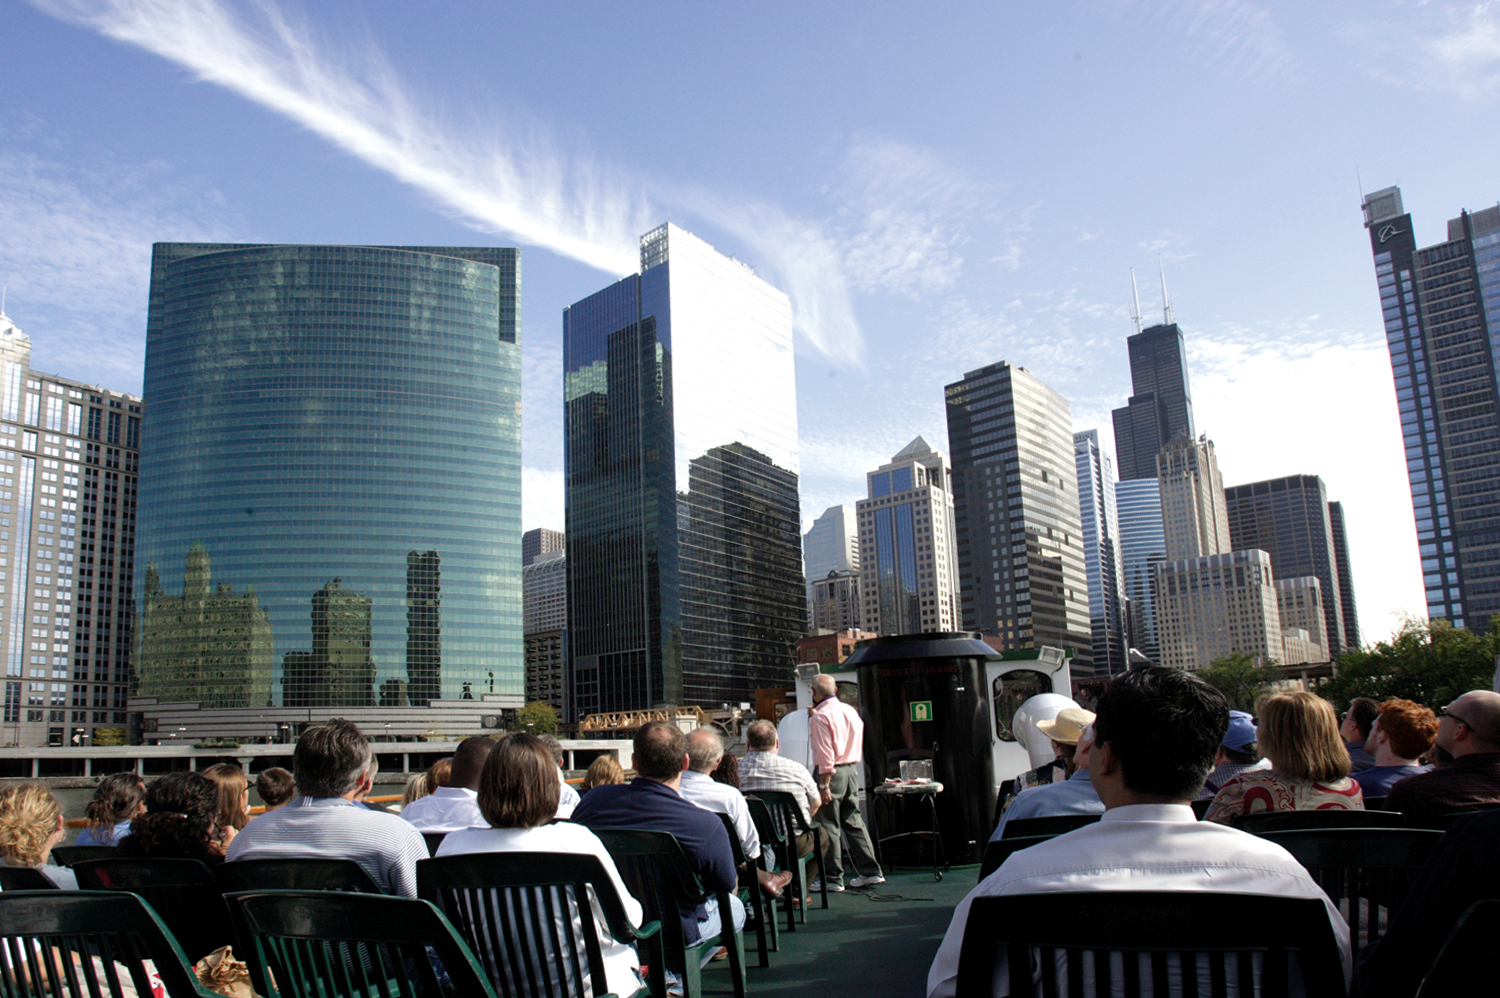 Architecture River Cruise. Courtesy of Chicago‘s First Lady © Chicago Architecture Foundation